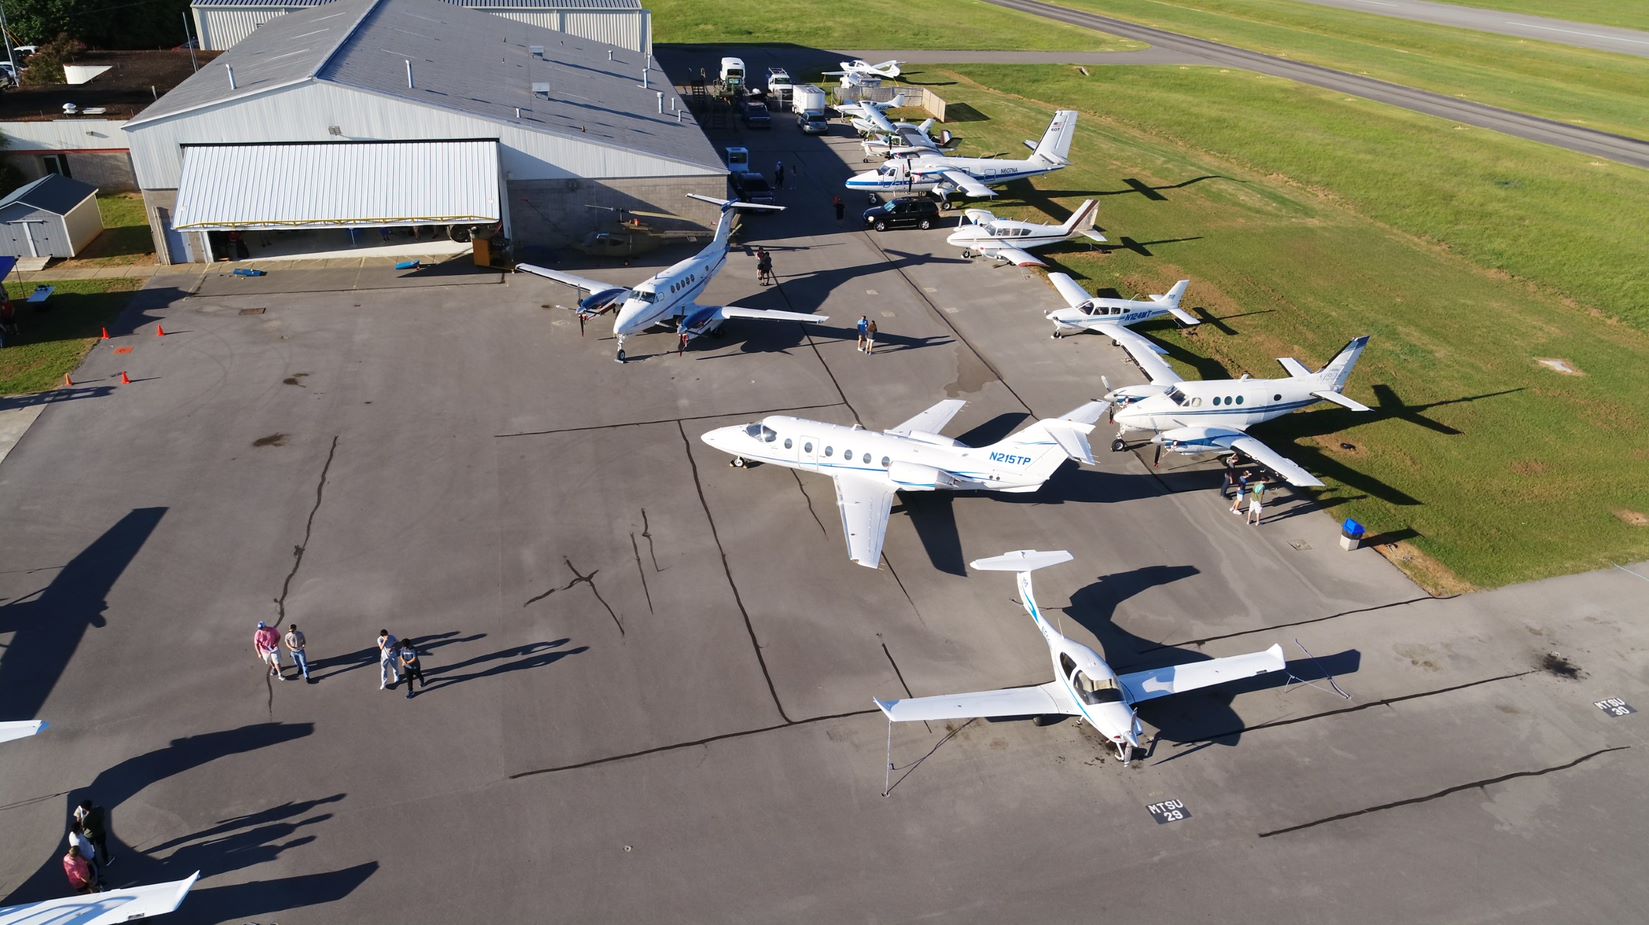 A group of airplanes pointing in various directions sits on the tarmac of an airport near a large building.